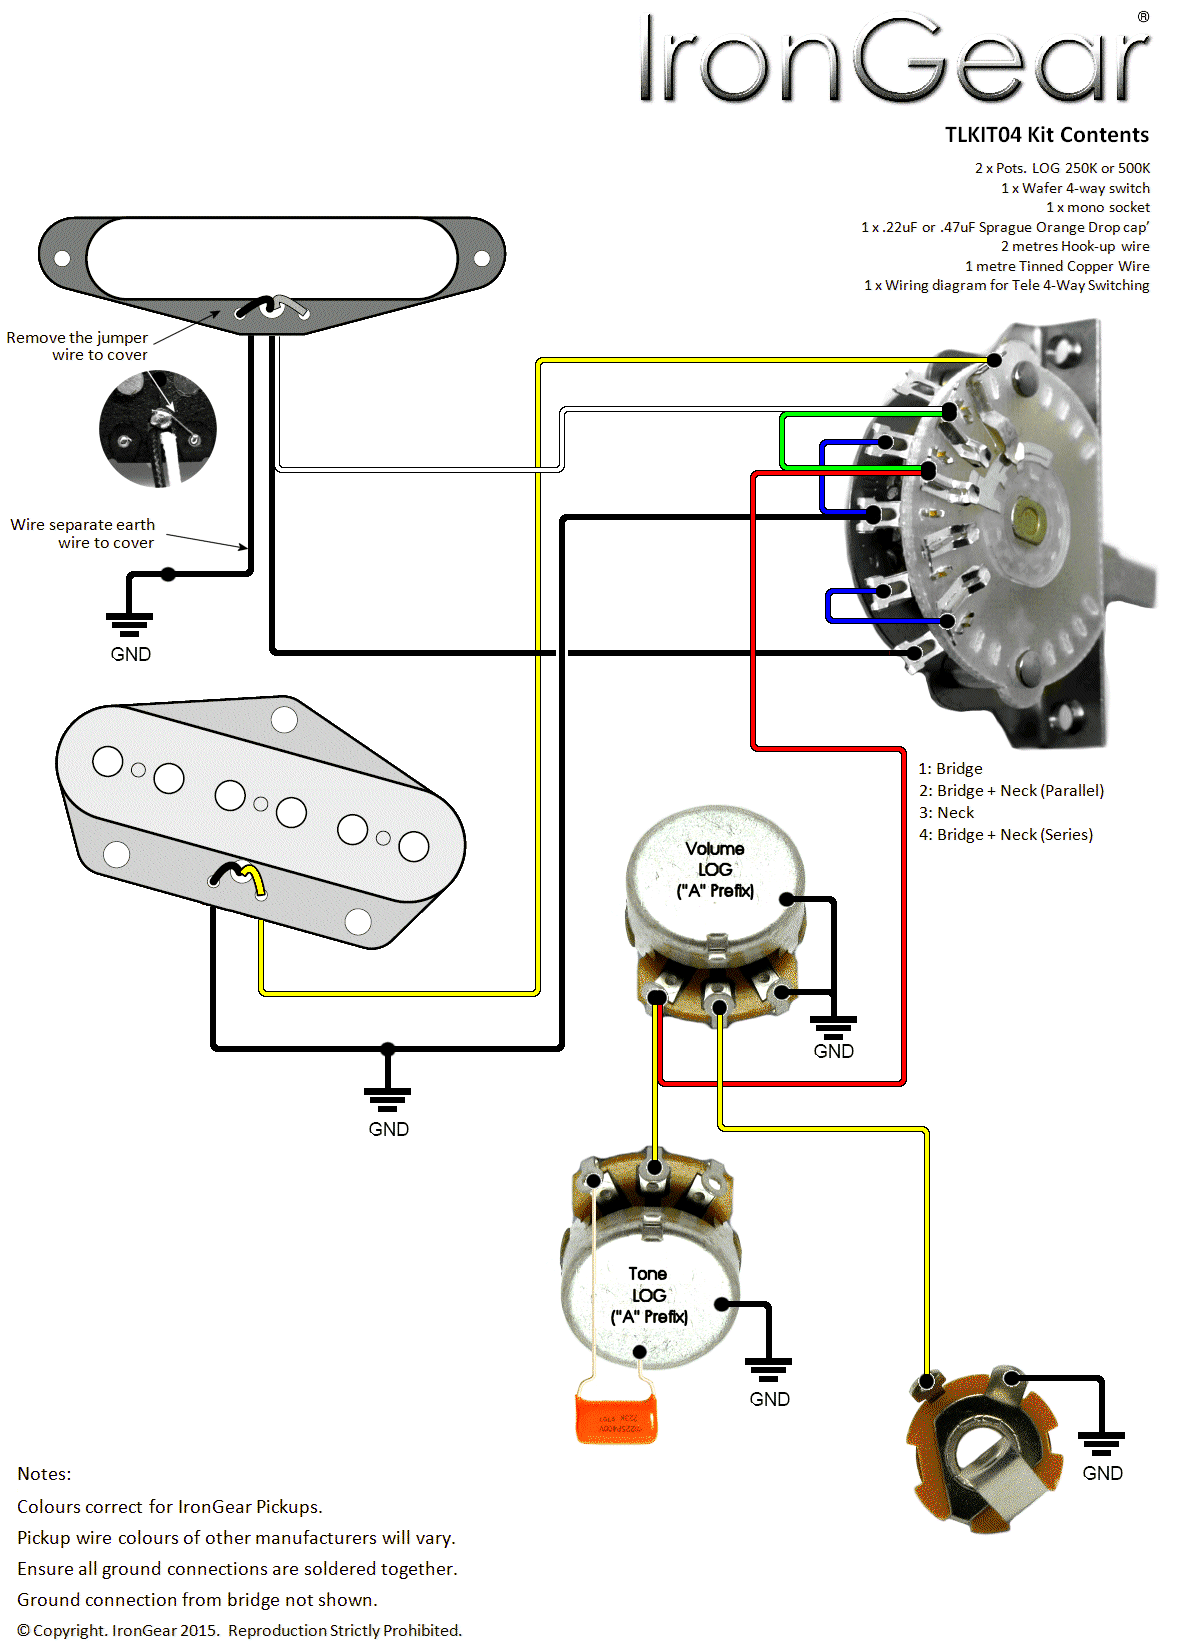 4 Way Telecaster Wiring Diagram from www.axetec.co.uk